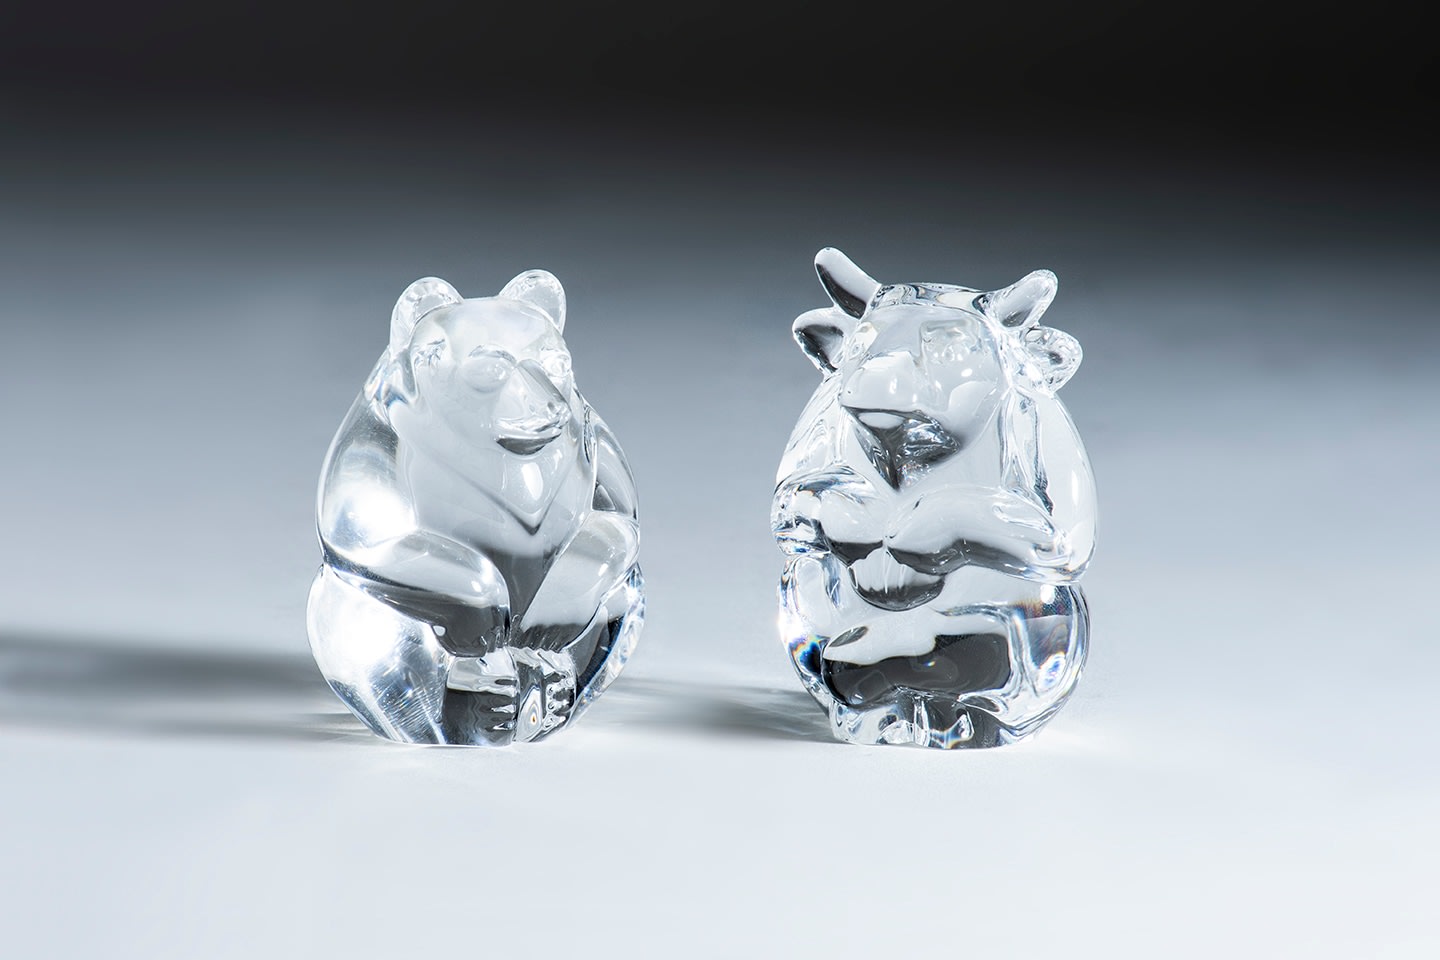 small ovoid crystal sculptures meant to nestle in the palm of the hand, one in the form of a bear and the other a bull